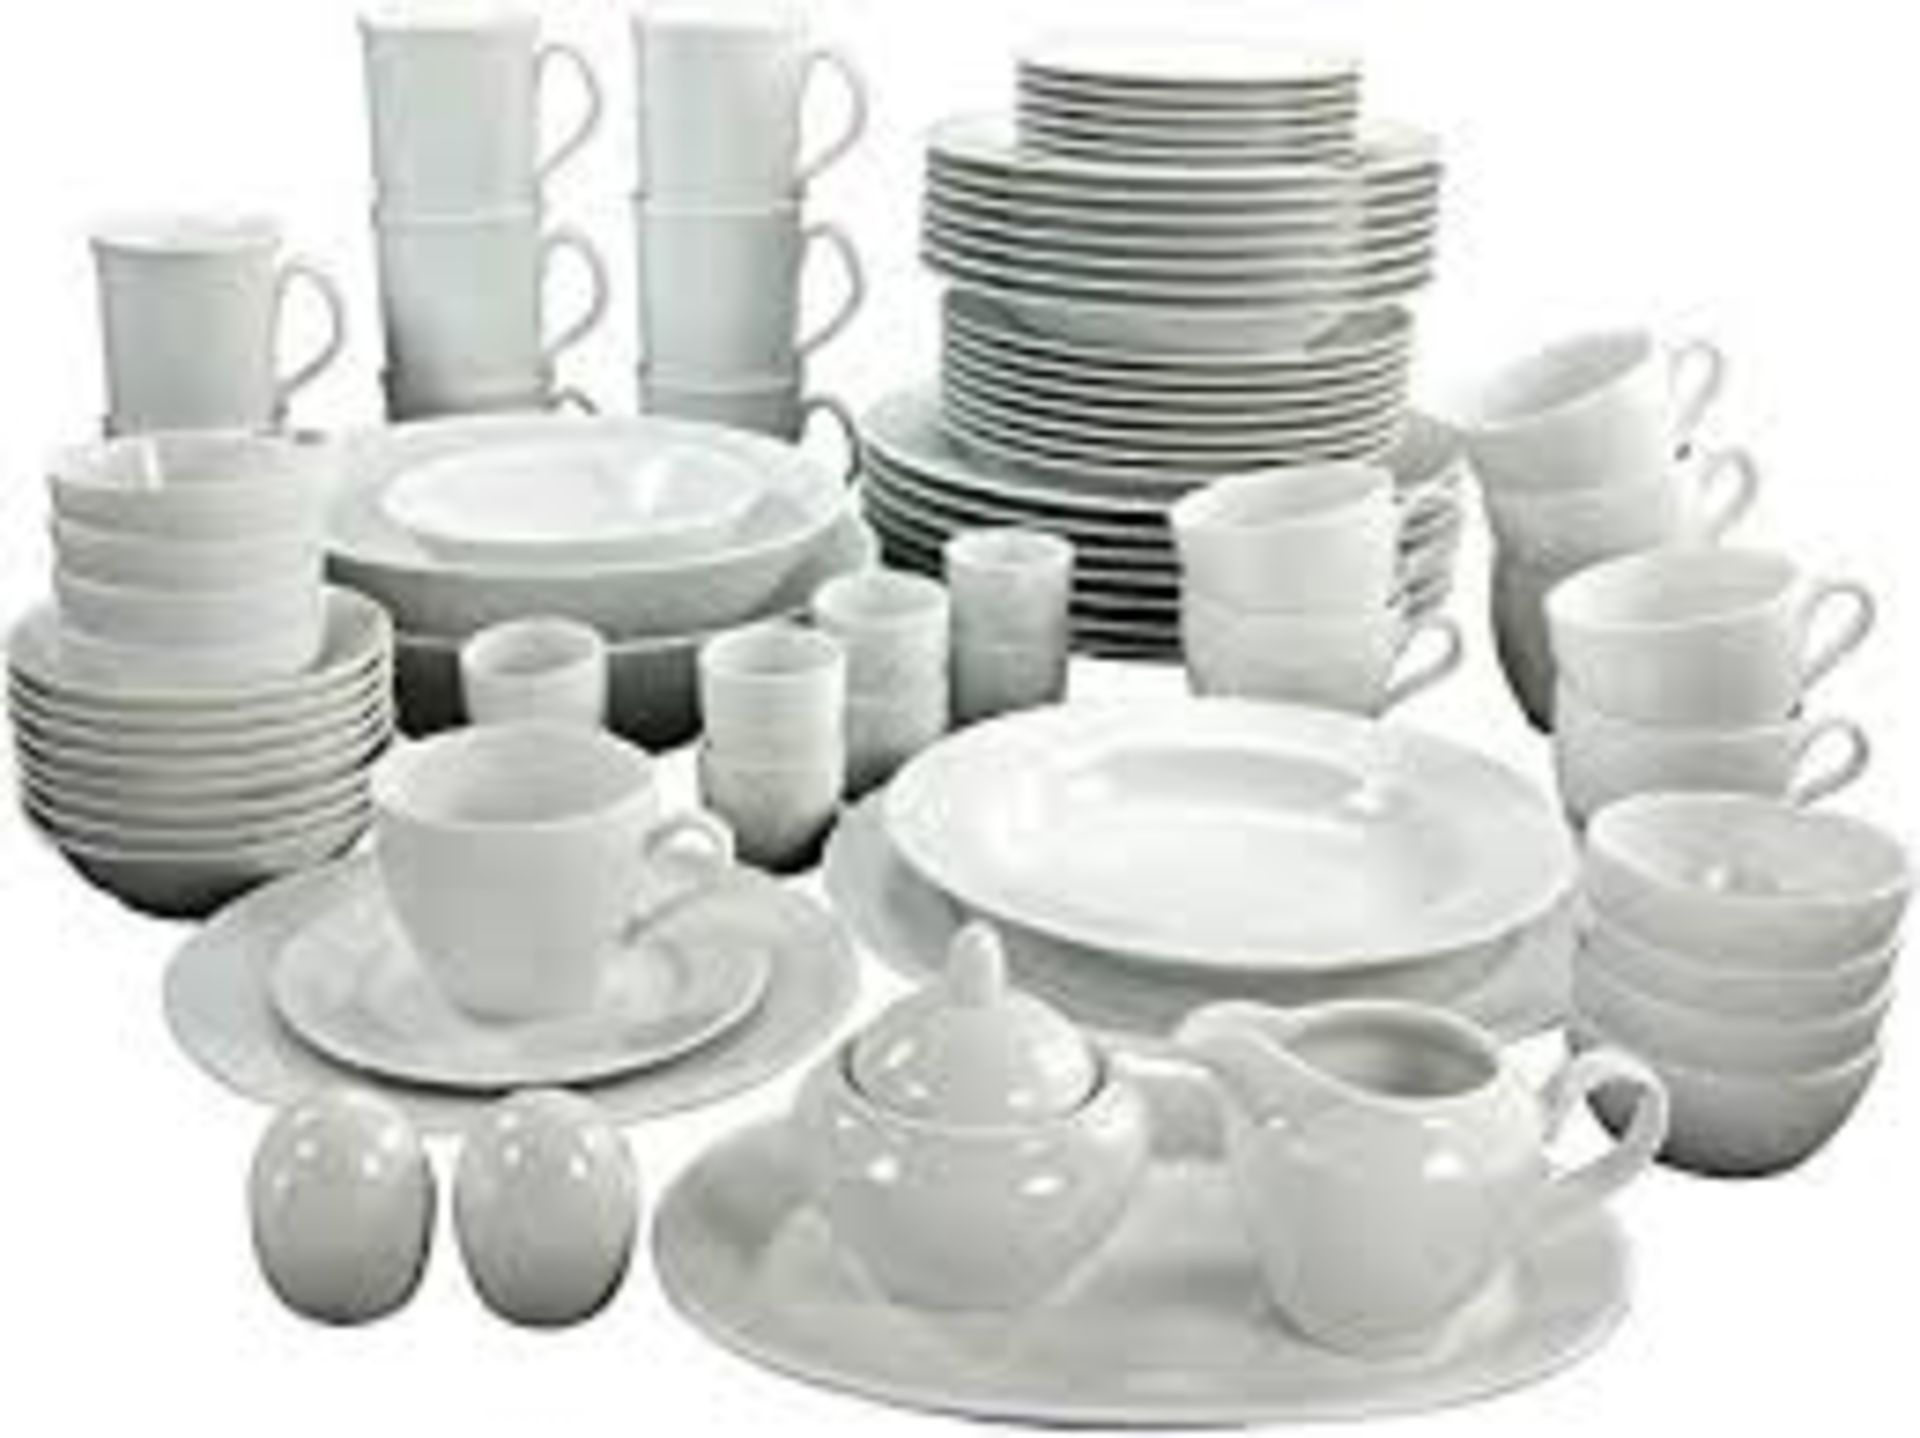 Boxed Porcelain Haus Creatable 6 Person Dinner Set RRP £115 (16253) (10.1.20) (Public Viewing and